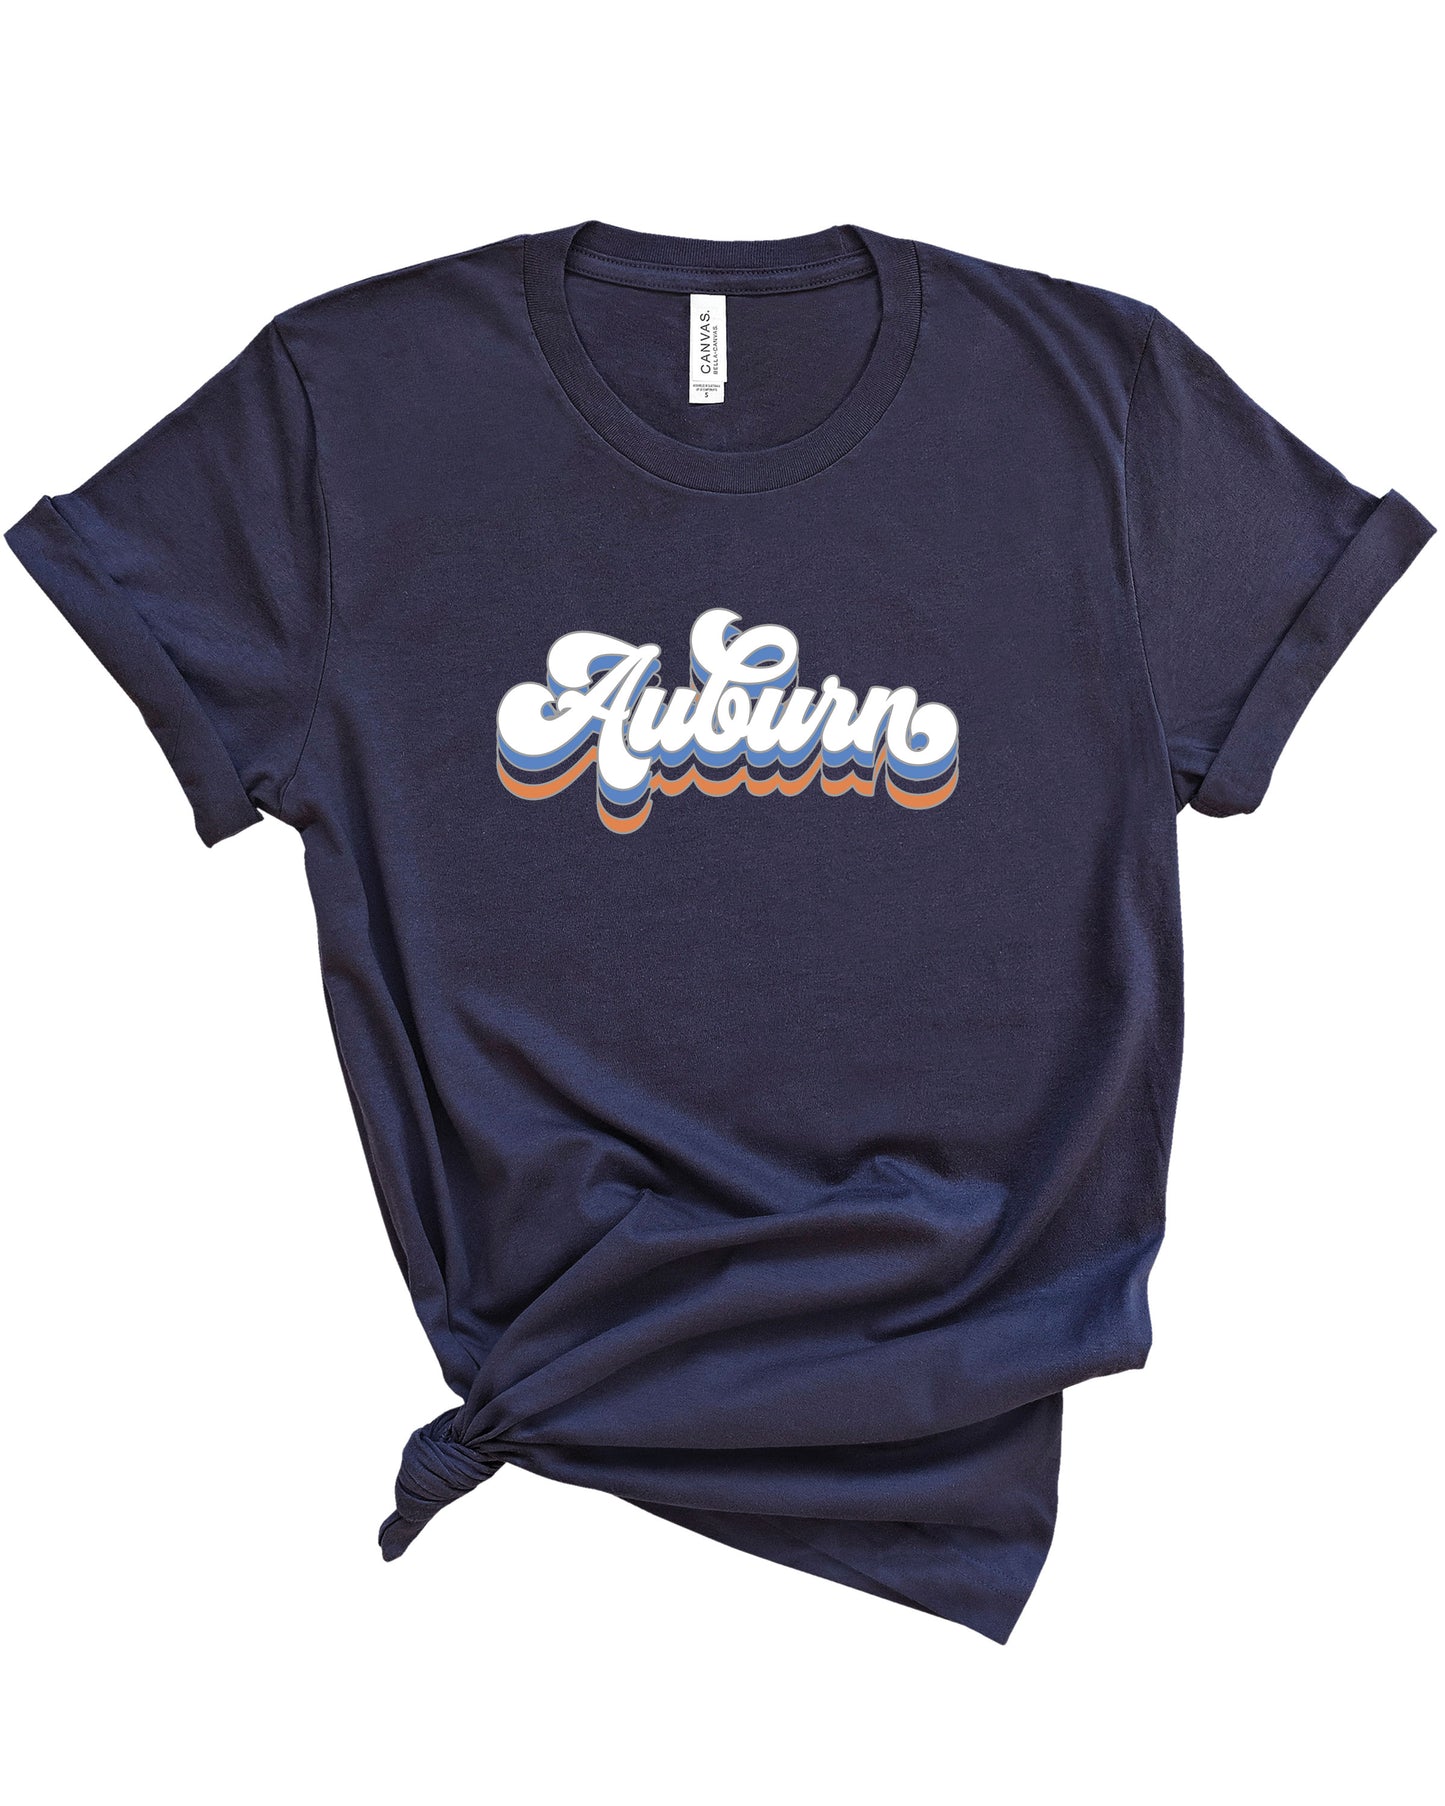 Groovy Auburn | Adult Tee | RTS-Sister Shirts-Sister Shirts, Cute & Custom Tees for Mama & Littles in Trussville, Alabama.